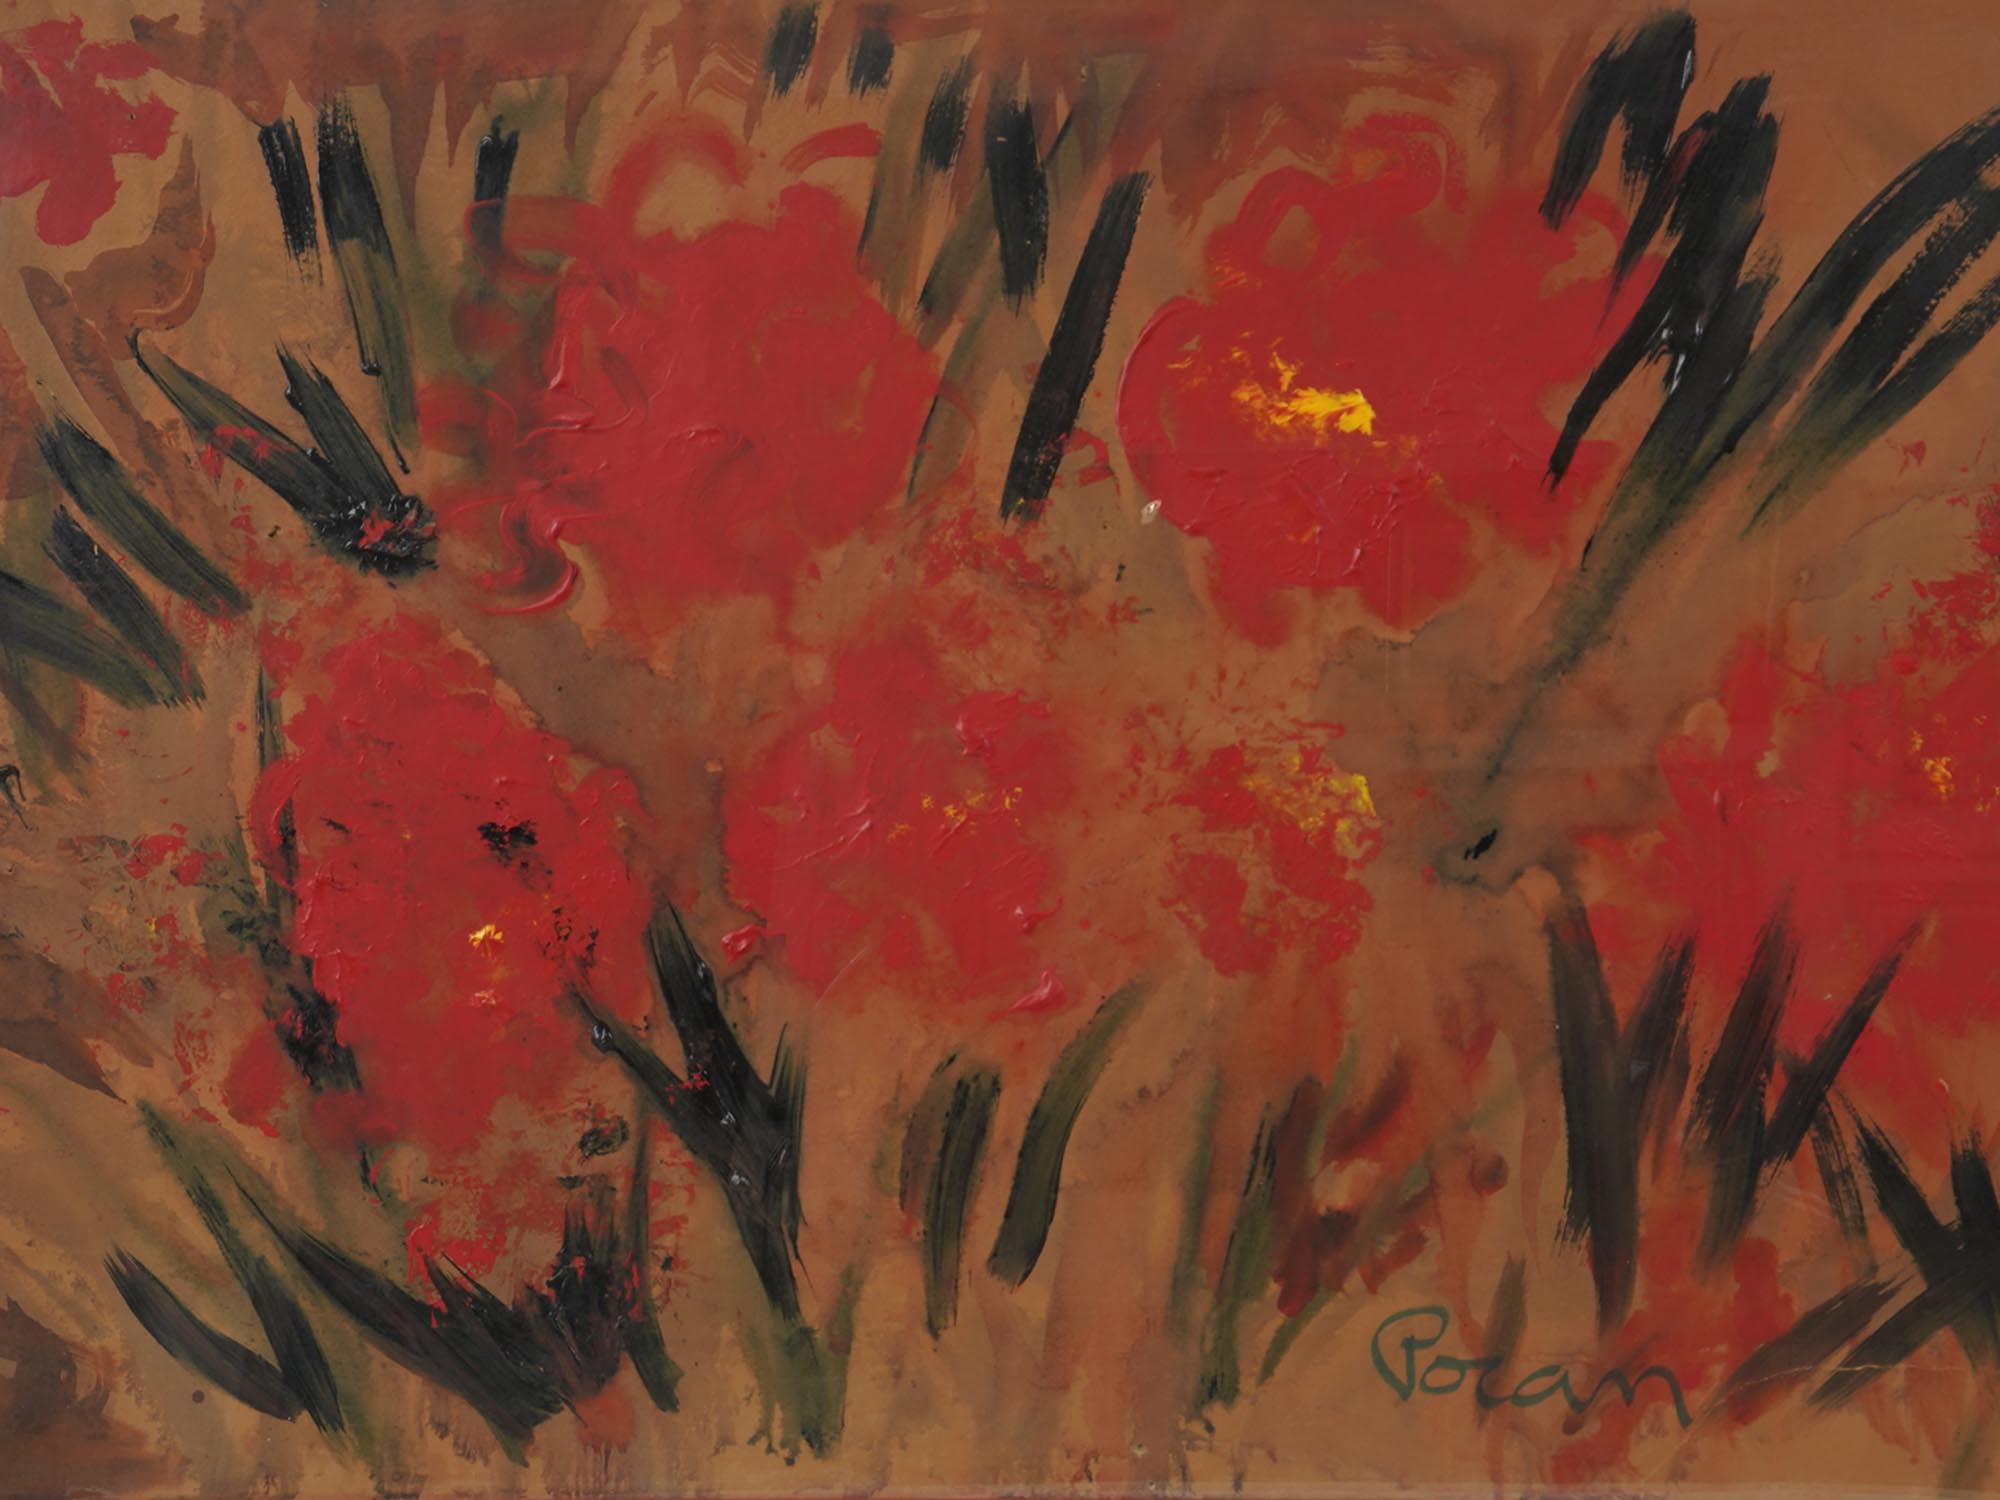 ABSTRACT OIL PAINTING RED FLOWER SIGNED BY GORAN PIC-1